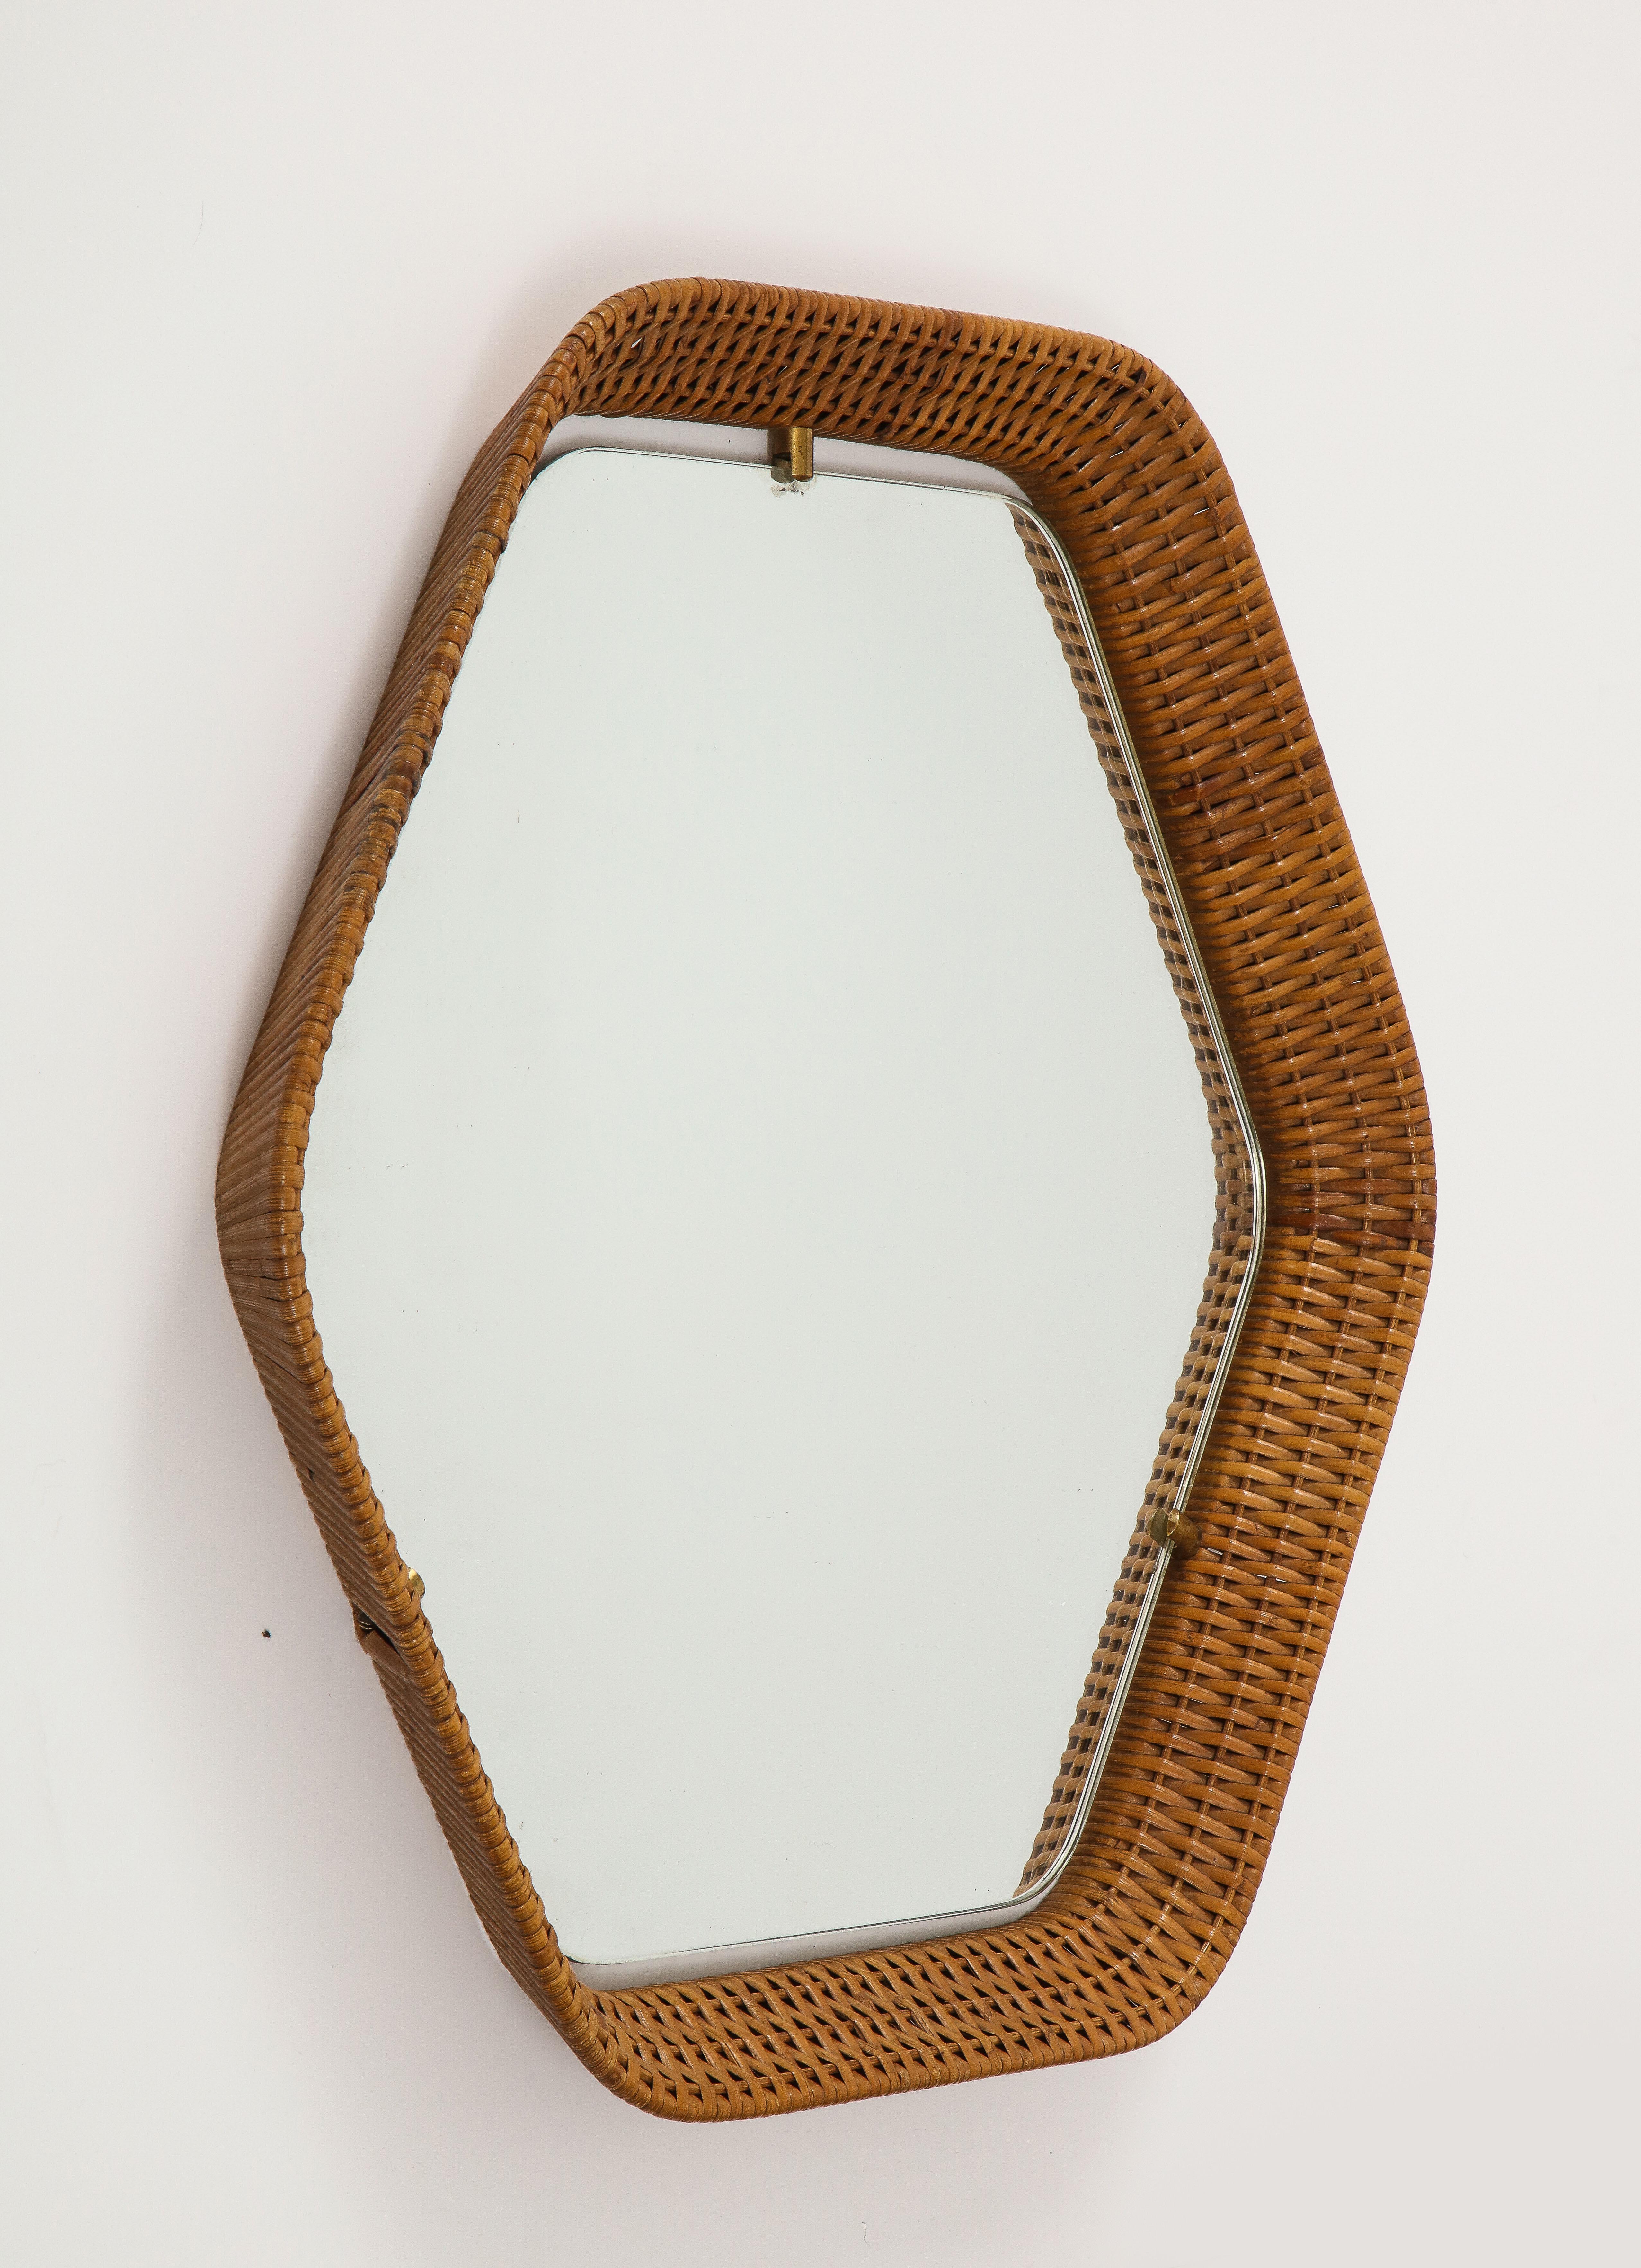 Italian rattan hexagonal shaped mirror, the glass joined by three decorative brass supports.
Stamp on back: Ditta Cantu, Roma
Rome, Italy, circa 1950s
Size: 23